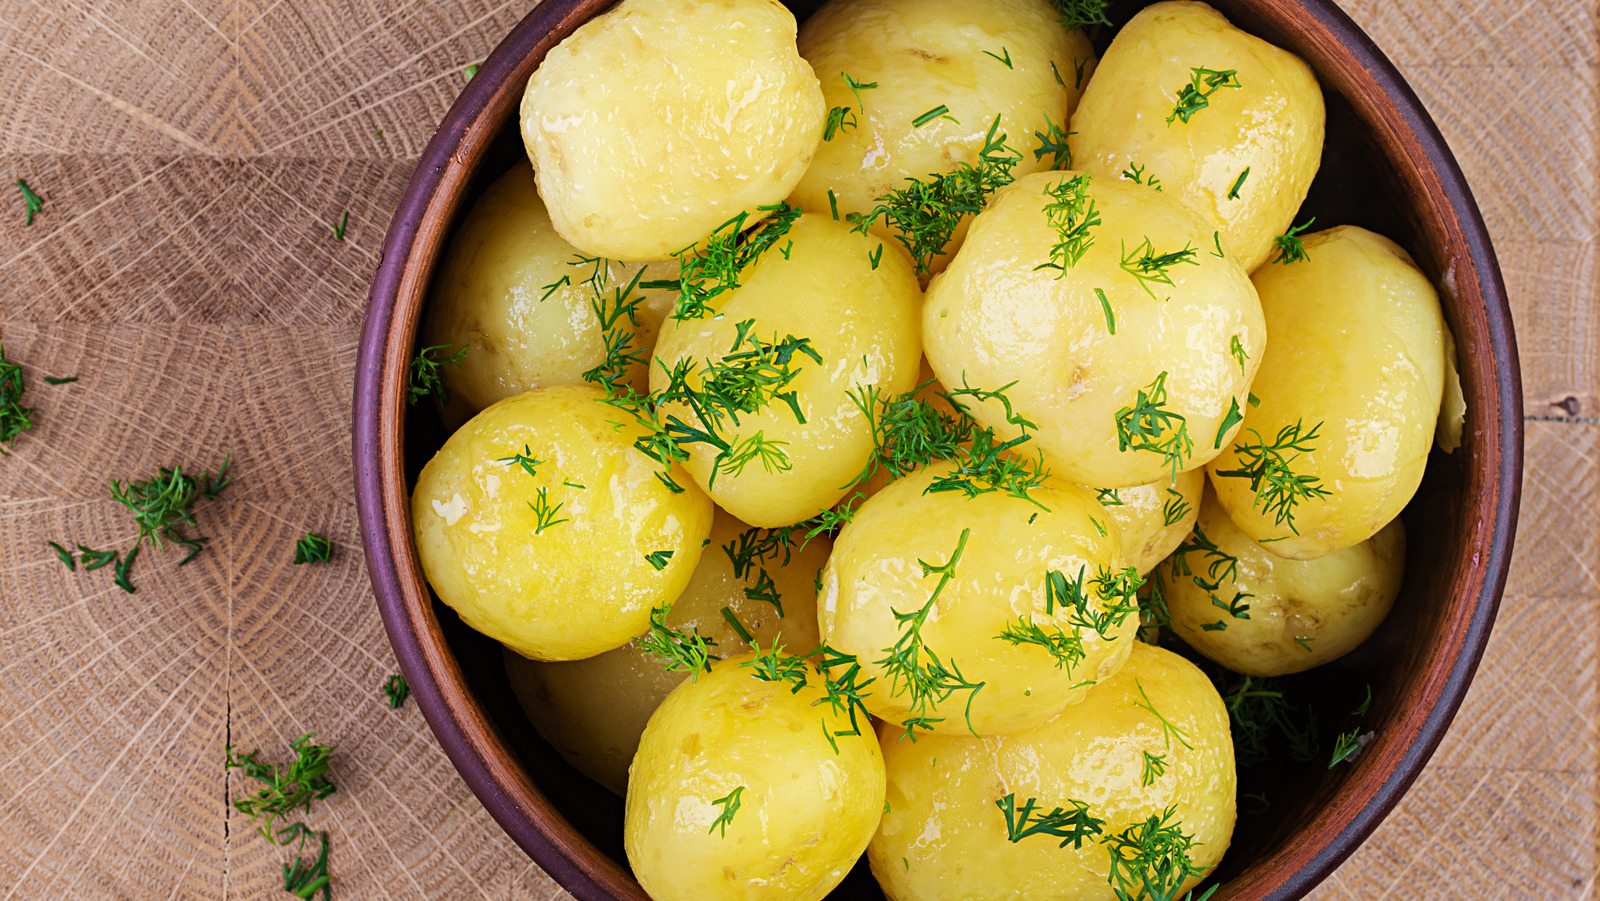 When Is The Ideal Time To Salt Boiled Potatoes?